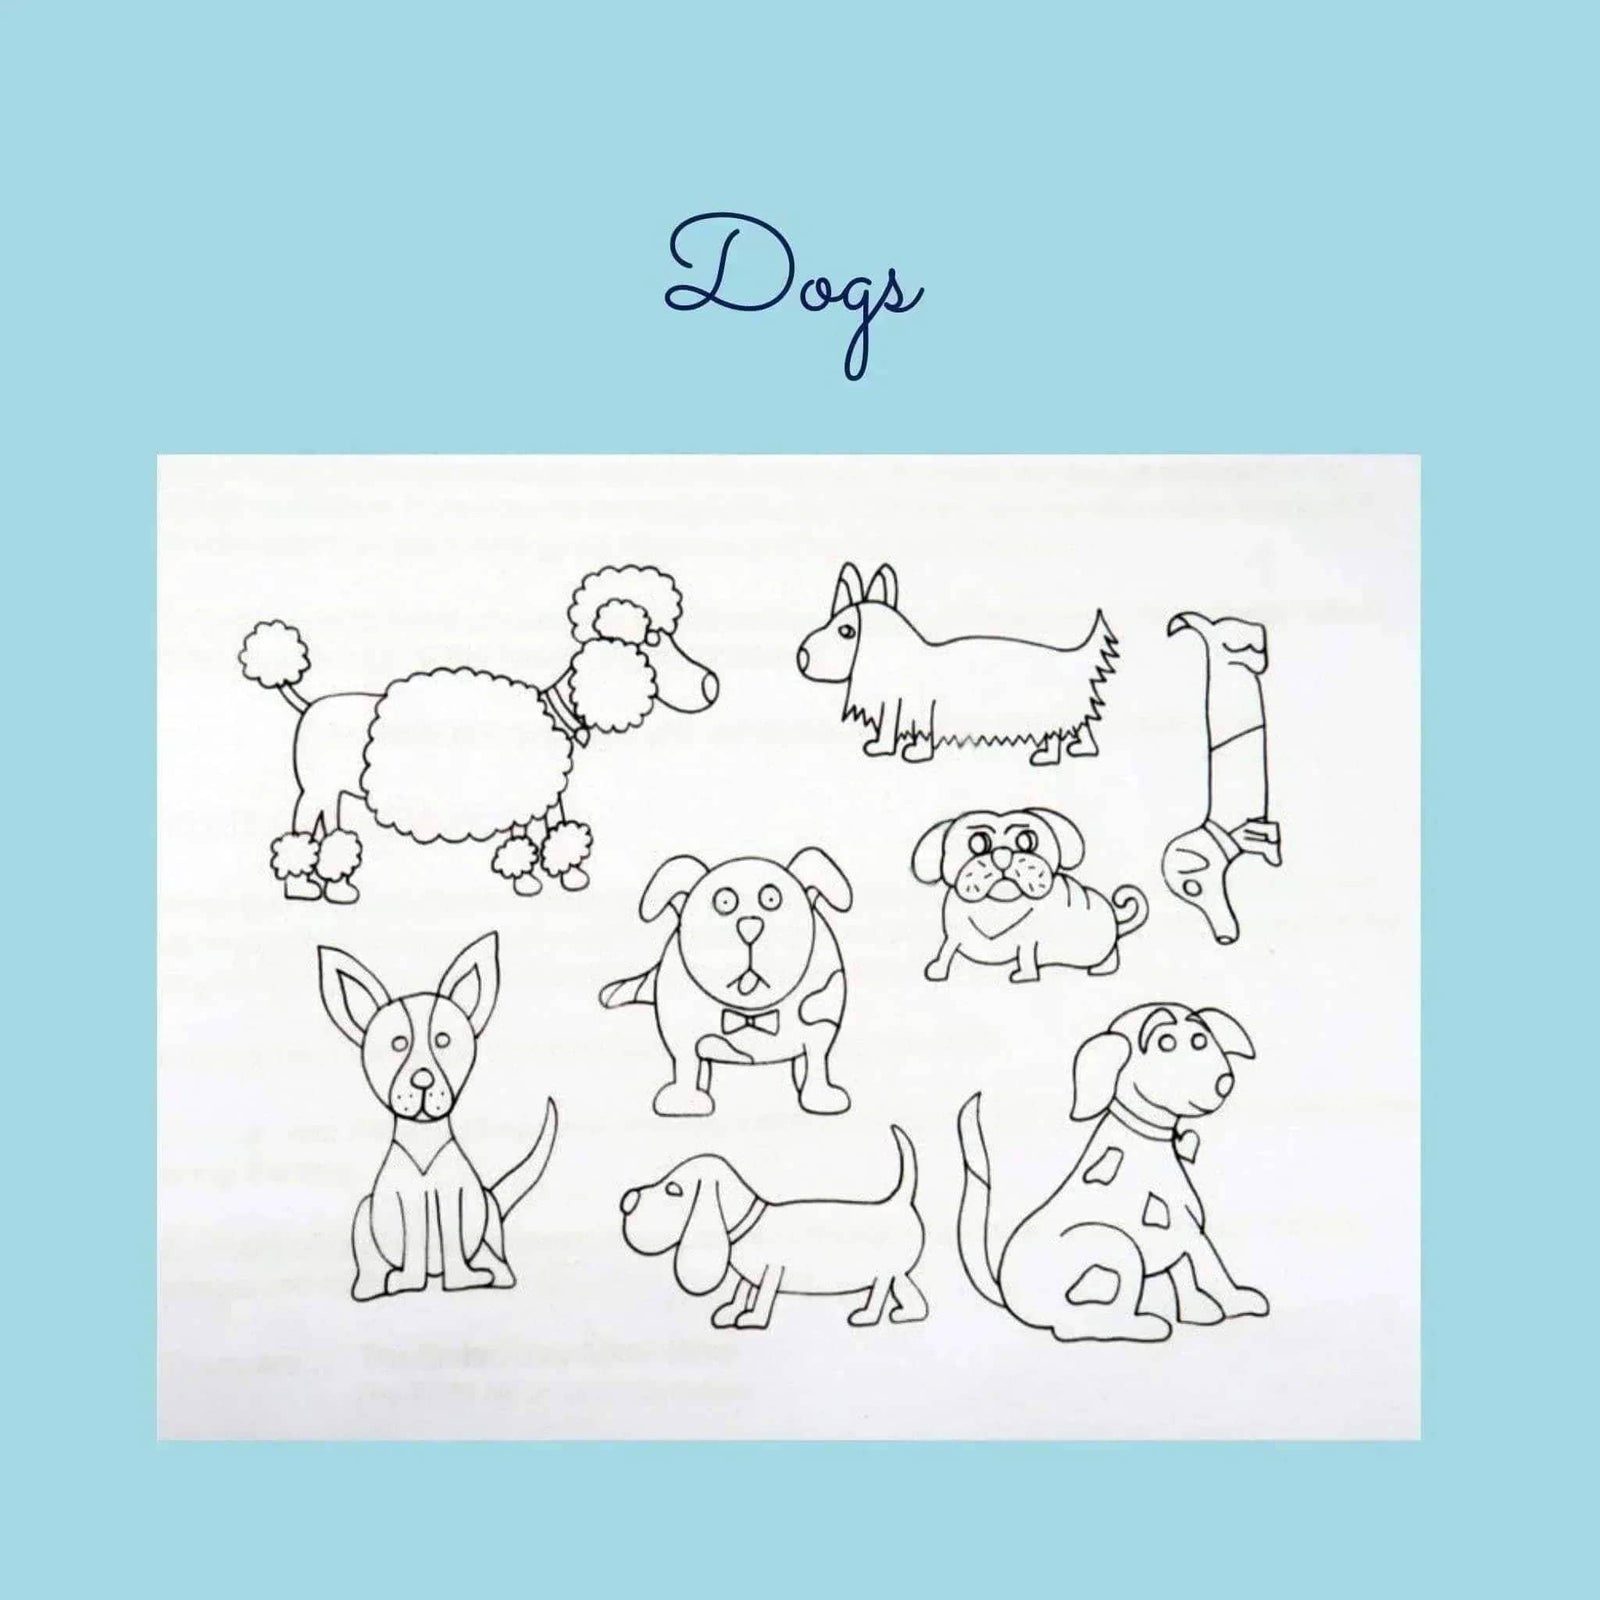 Dog Breeds Hand Embroidery Template , PDF Download , StitchDoodles , Embroidery, embroidery hoop, embroidery hoop kit, embroidery kits for adults, embroidery kits for beginners, embroidery pattern, hand embroidery, hand embroidery fabric, hand embroidery seat frame, modern embroidery kits, nurge embroidery hoop, PDF pattern, Printed Pattern, unique embroidery kits , StitchDoodles , shop.stitchdoodles.com